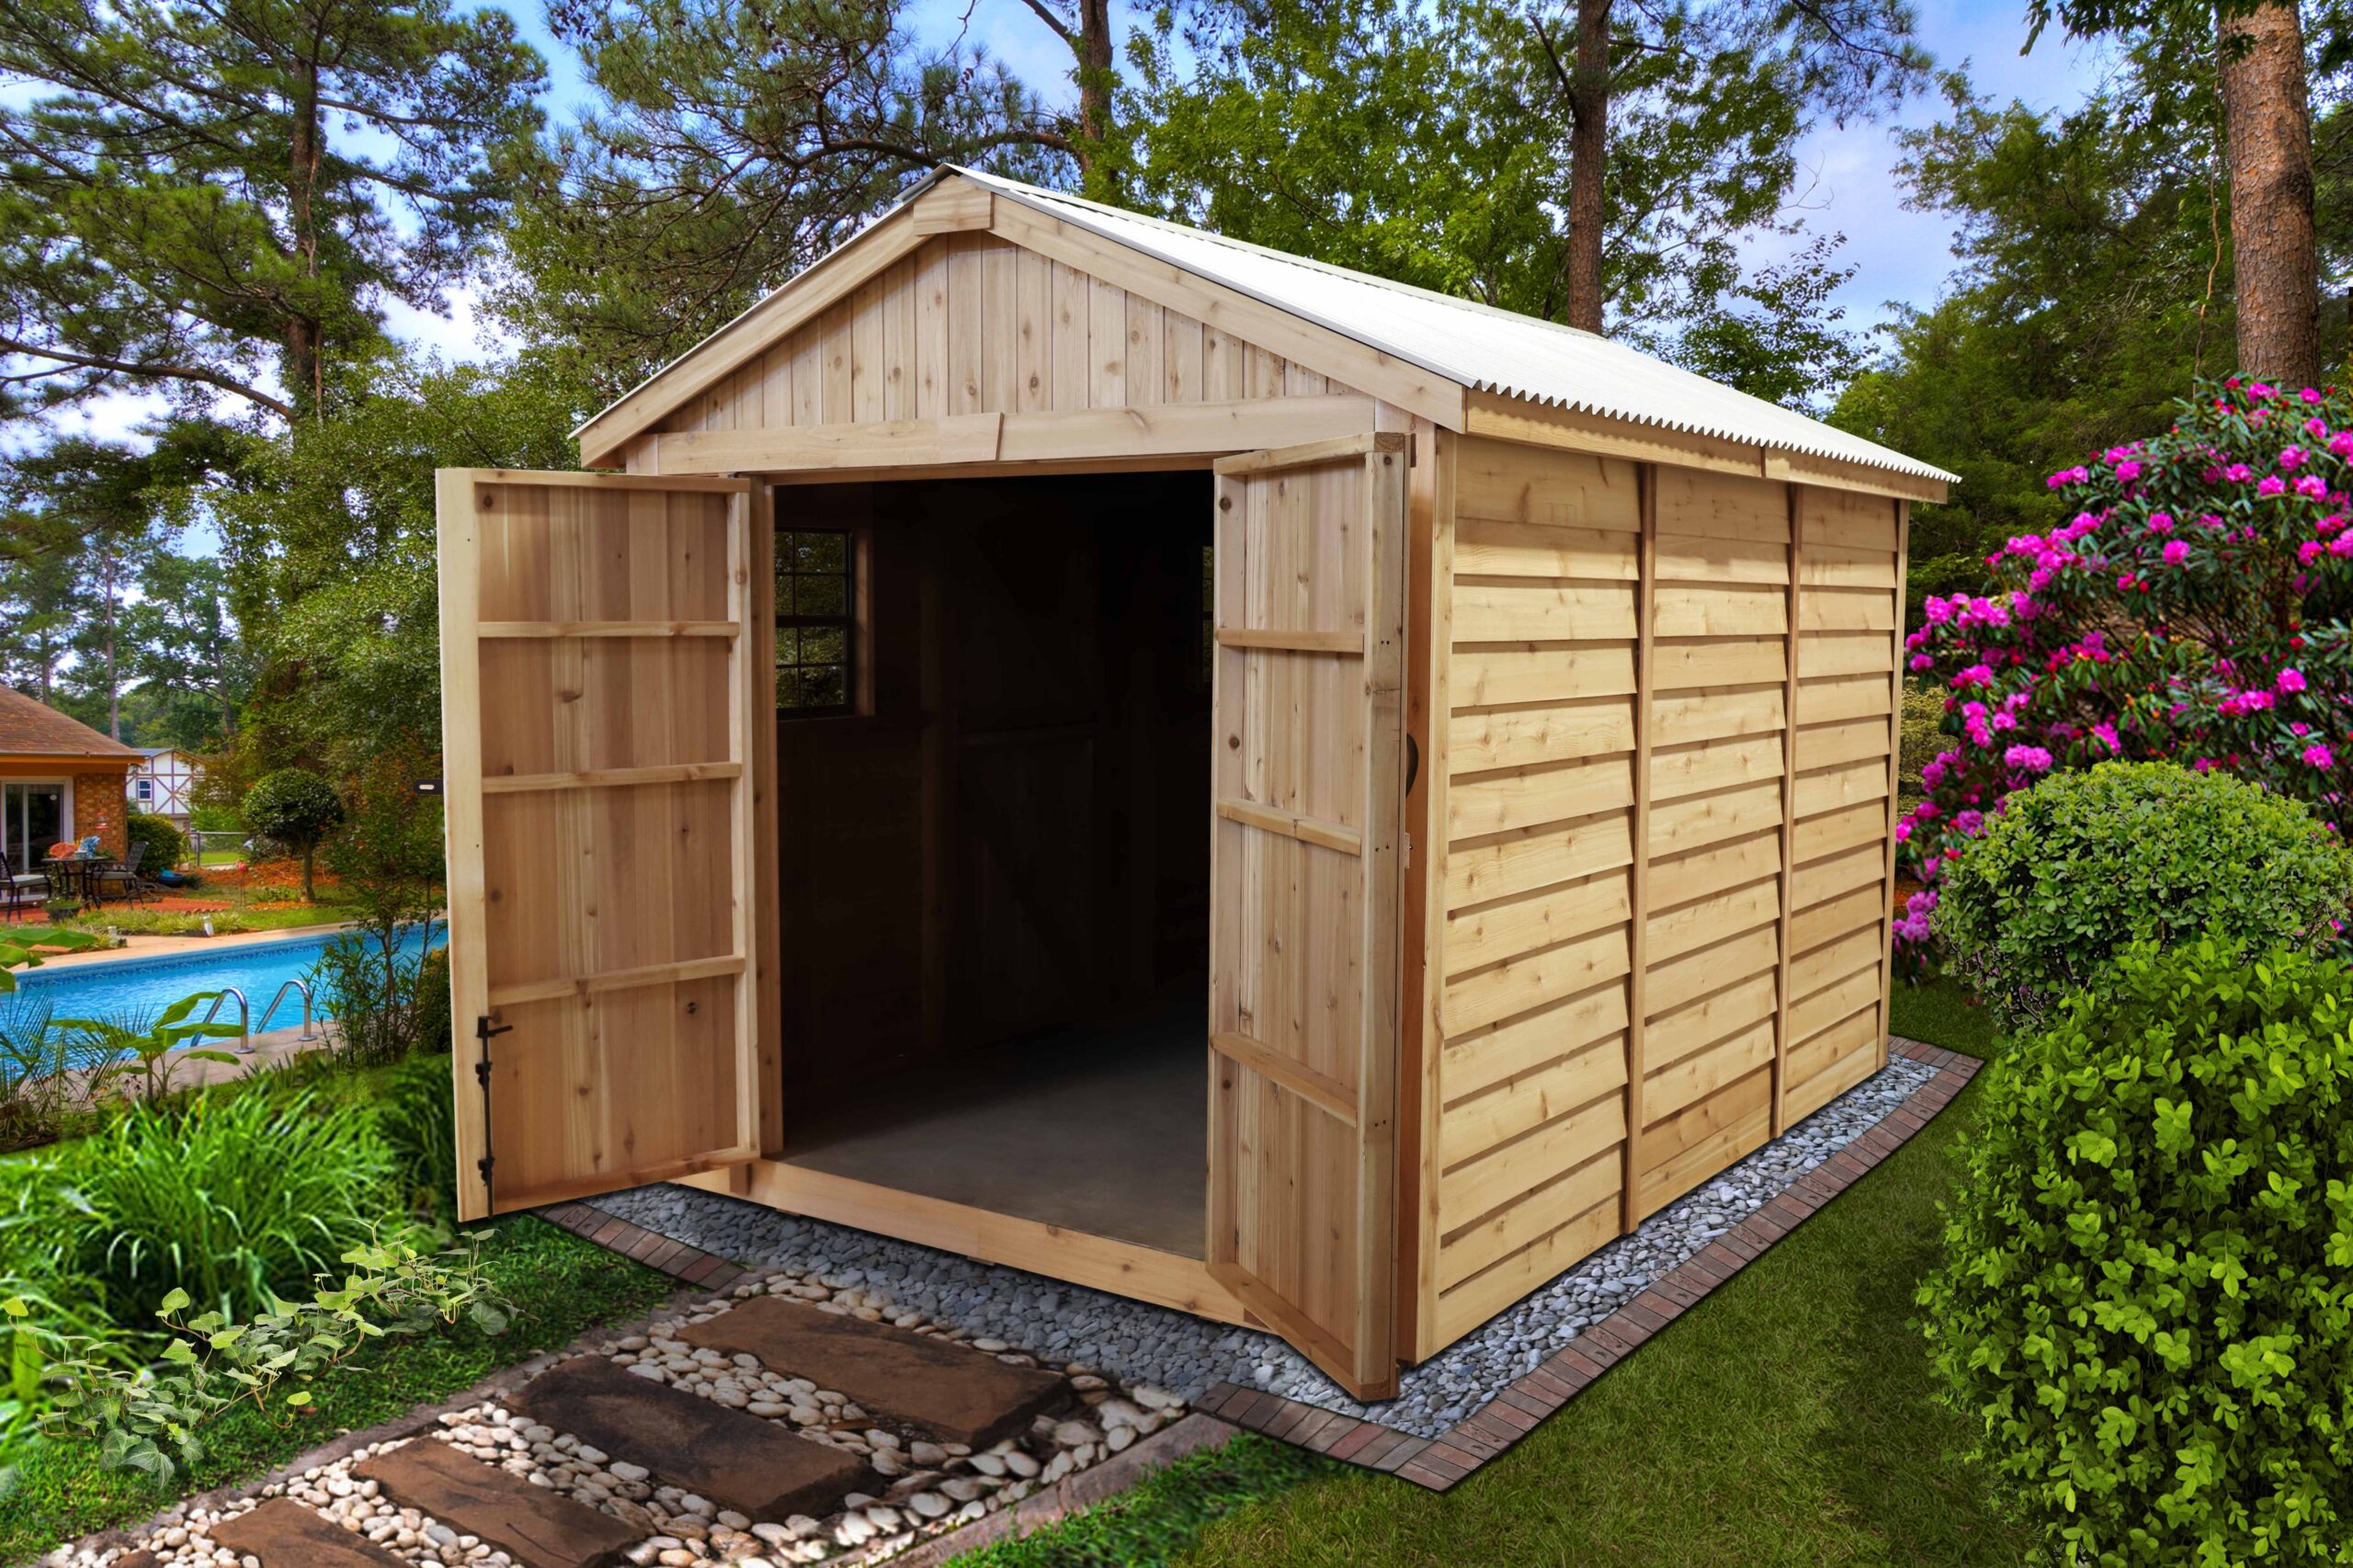 The 7 best rated garden sheds for 2021 suncast glidetop horizontal storage....